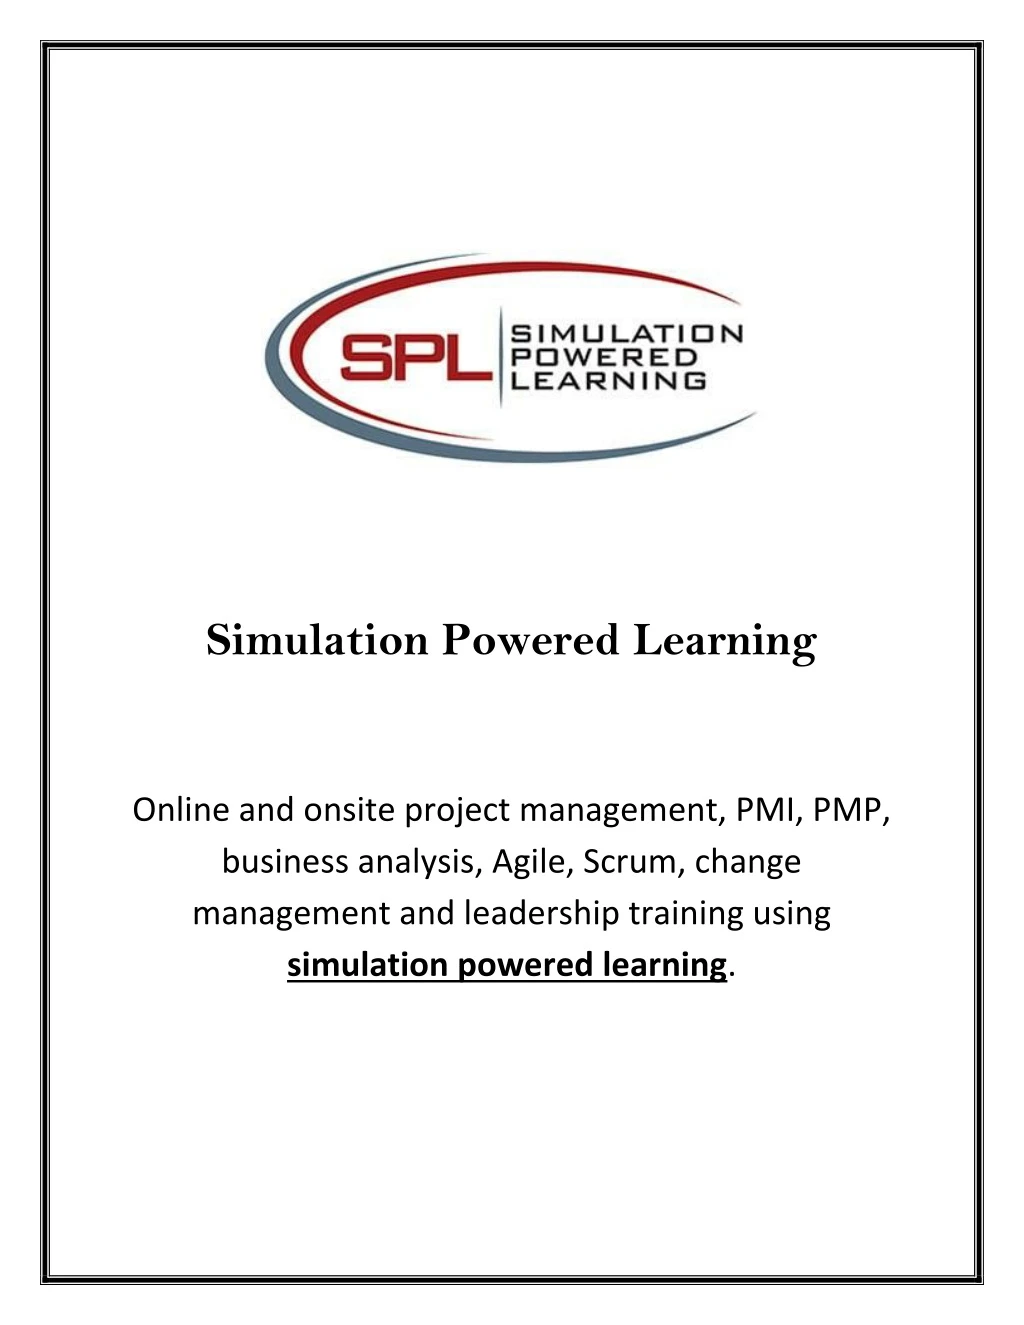 simulation powered learning